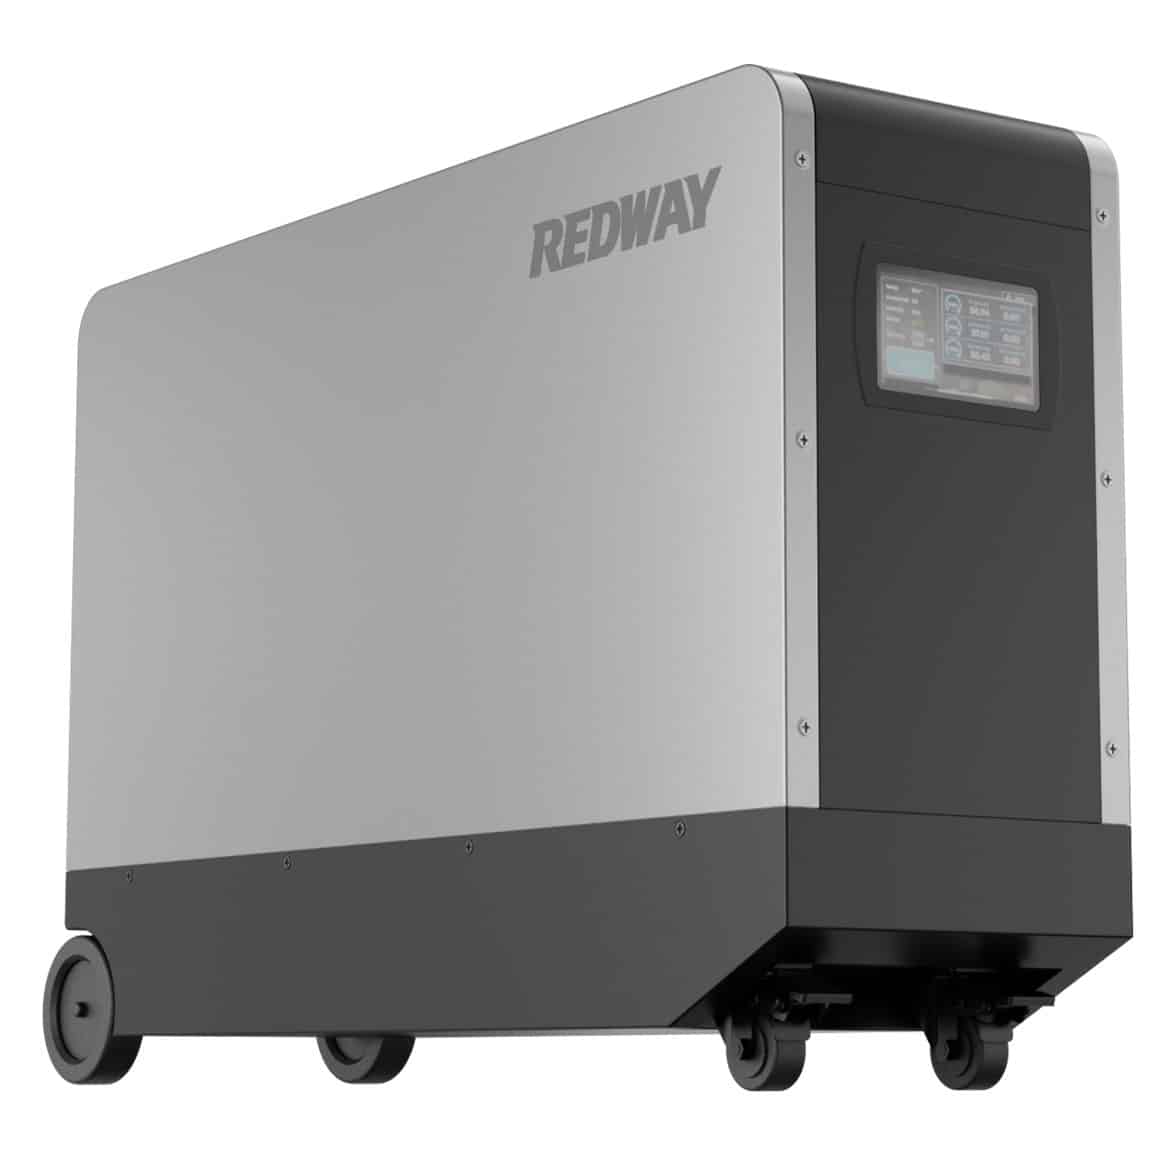 Renewable Energy Storage Made Easy with the PT51200 Power Trolley